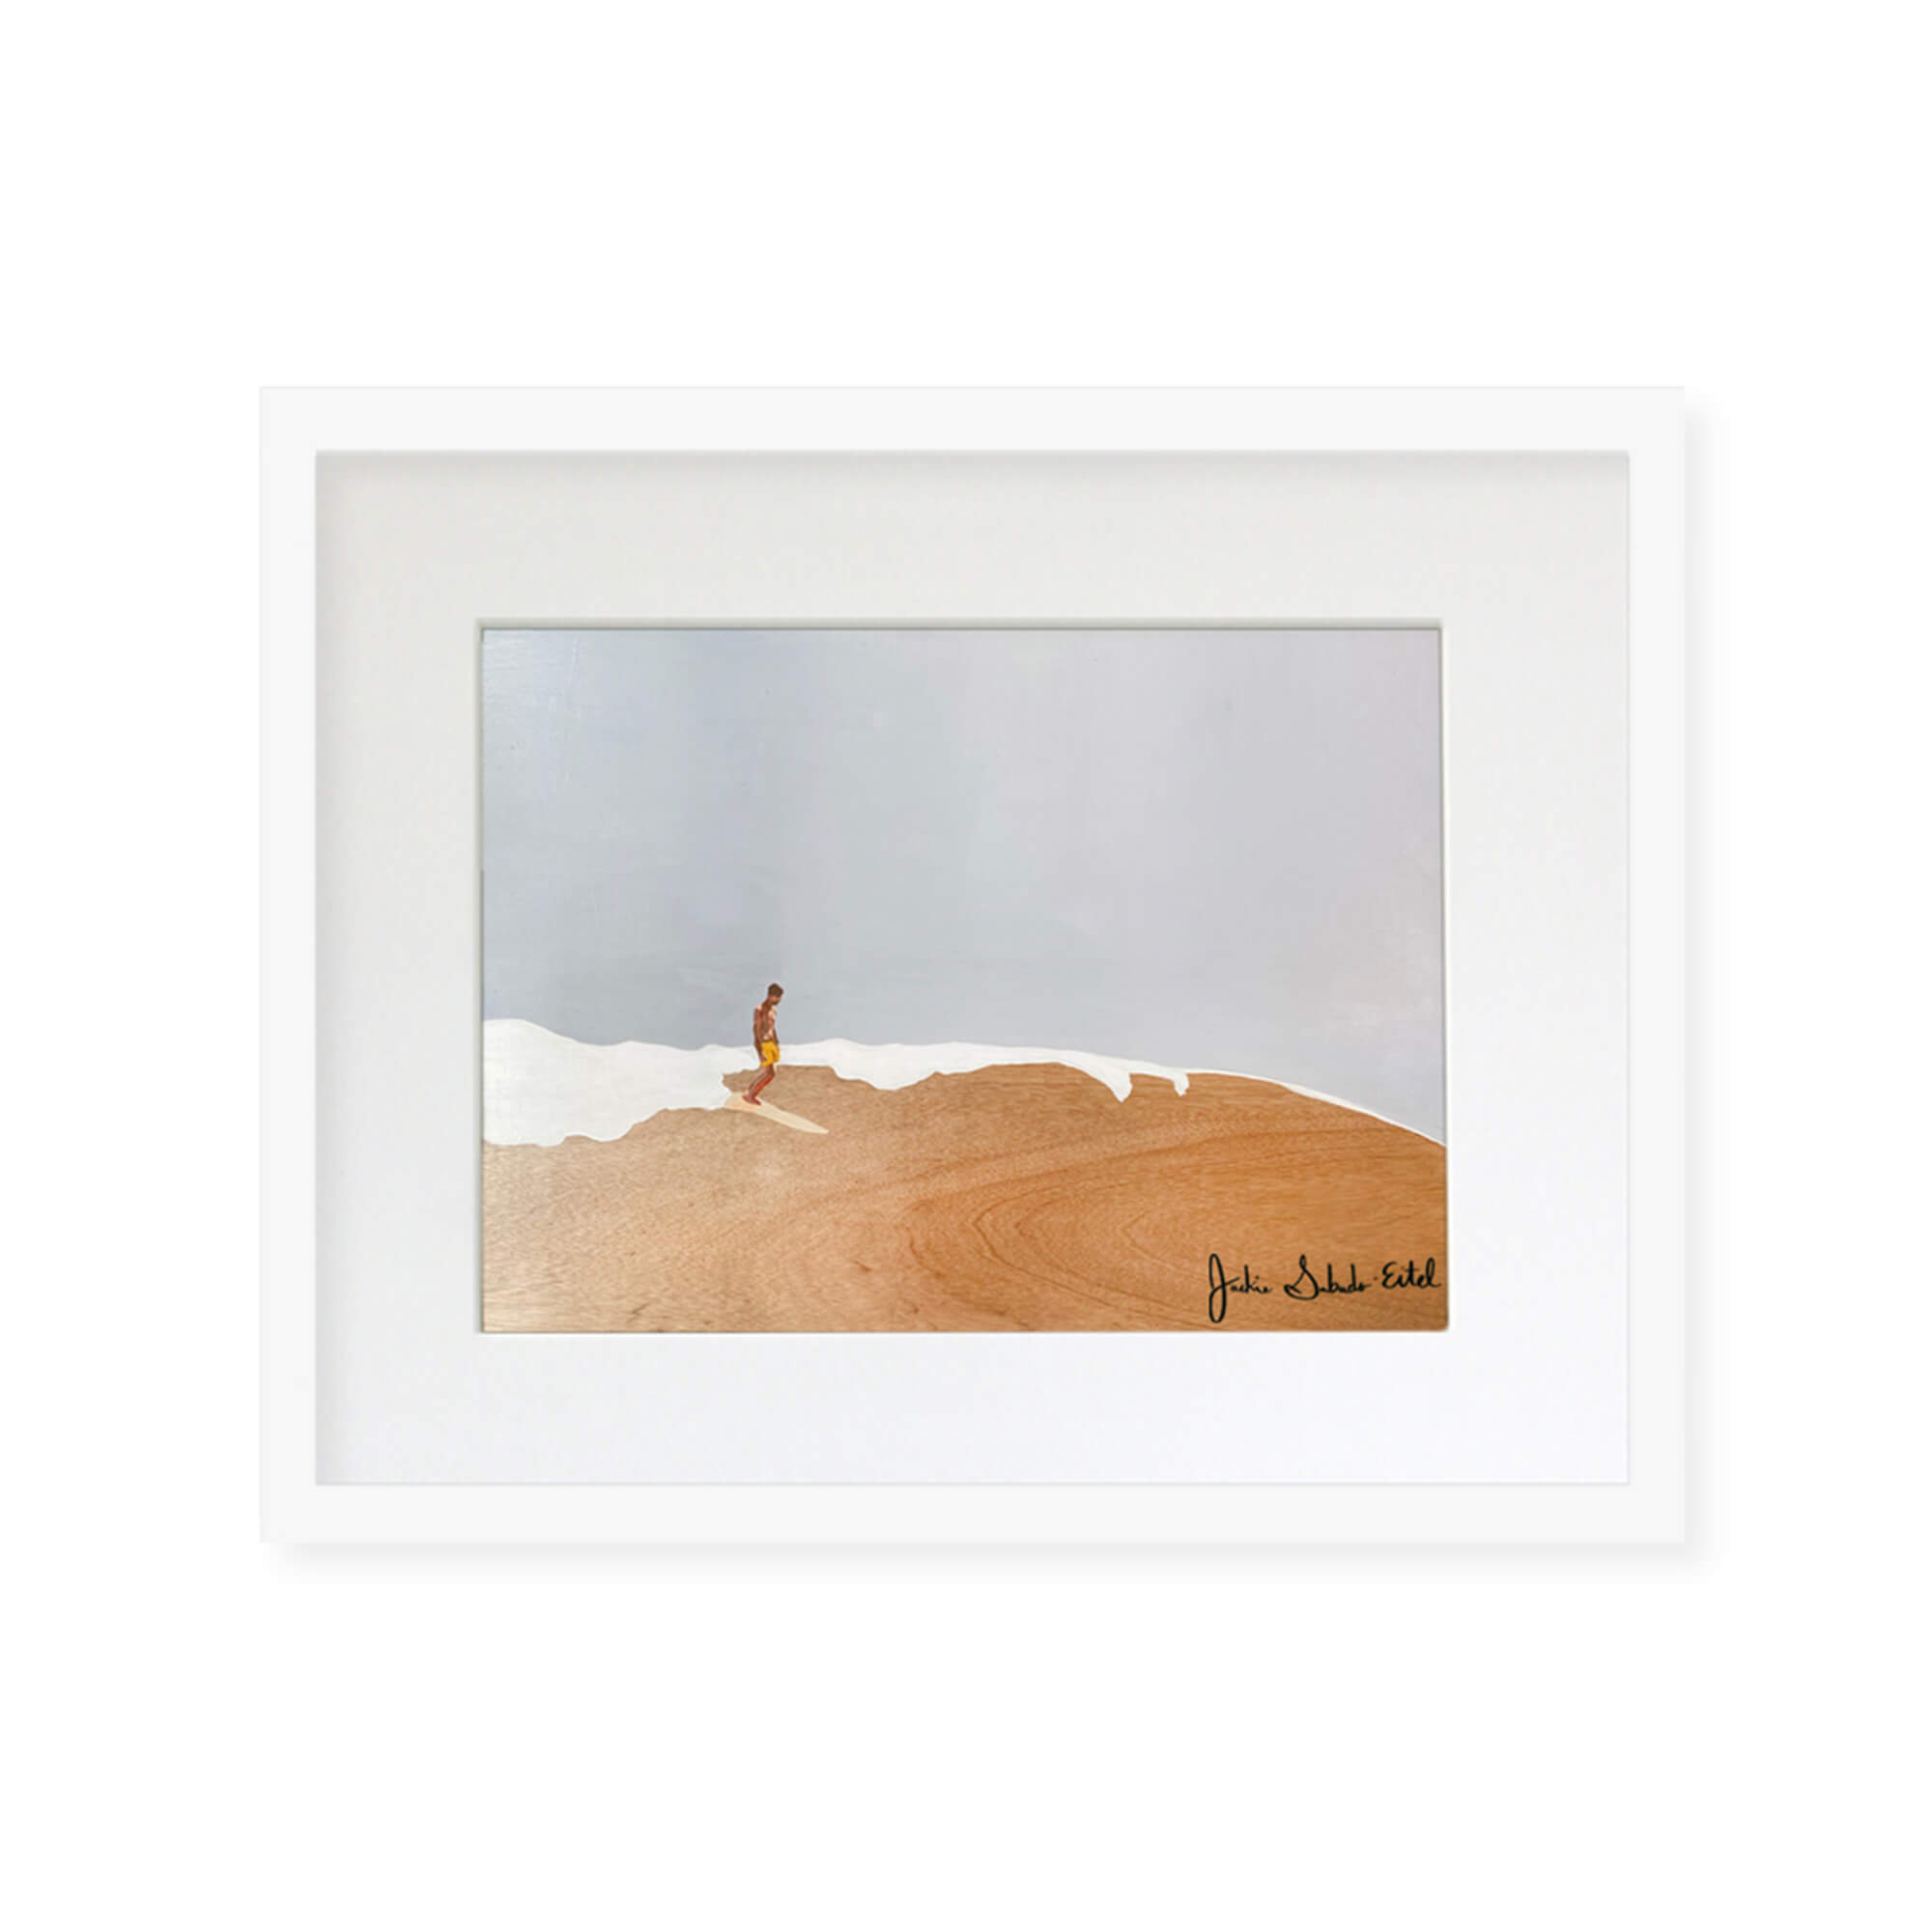 A framed matted art print featuring a man peacefully riding the epic waves of Hawaii by Hawaii artist Jackie Eitel